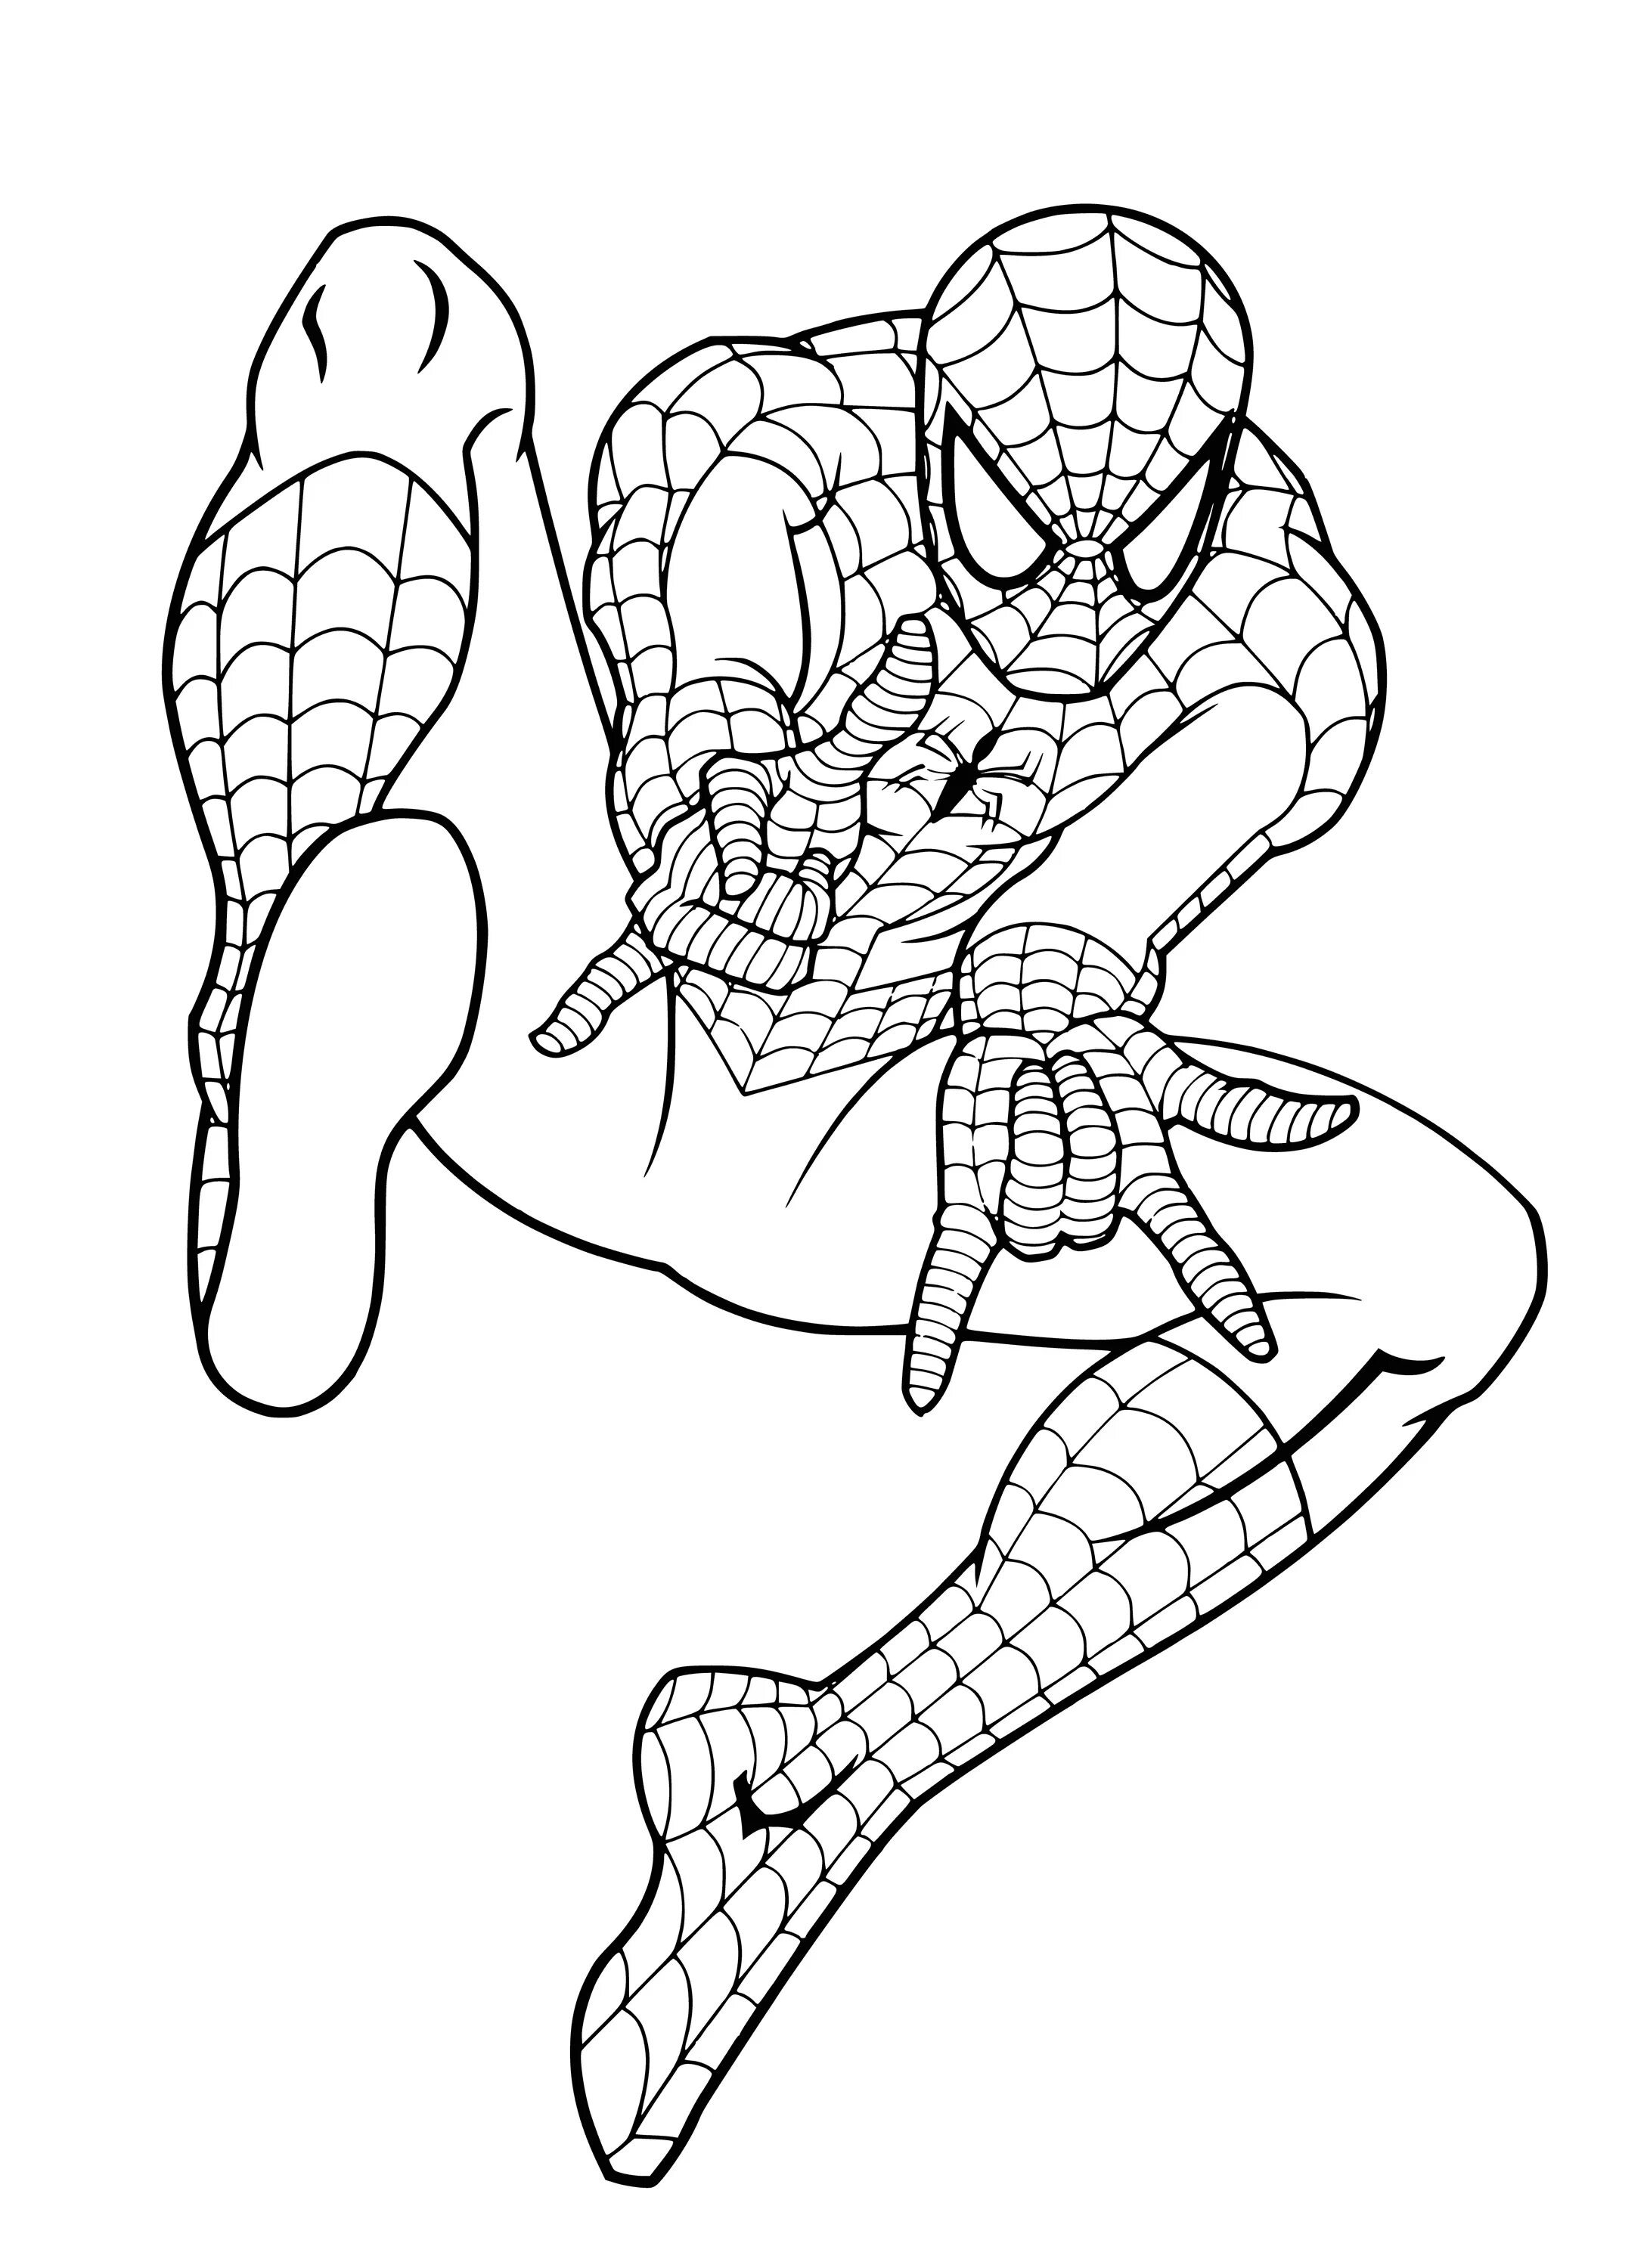 Spiderman for kids 4 5 years old #1